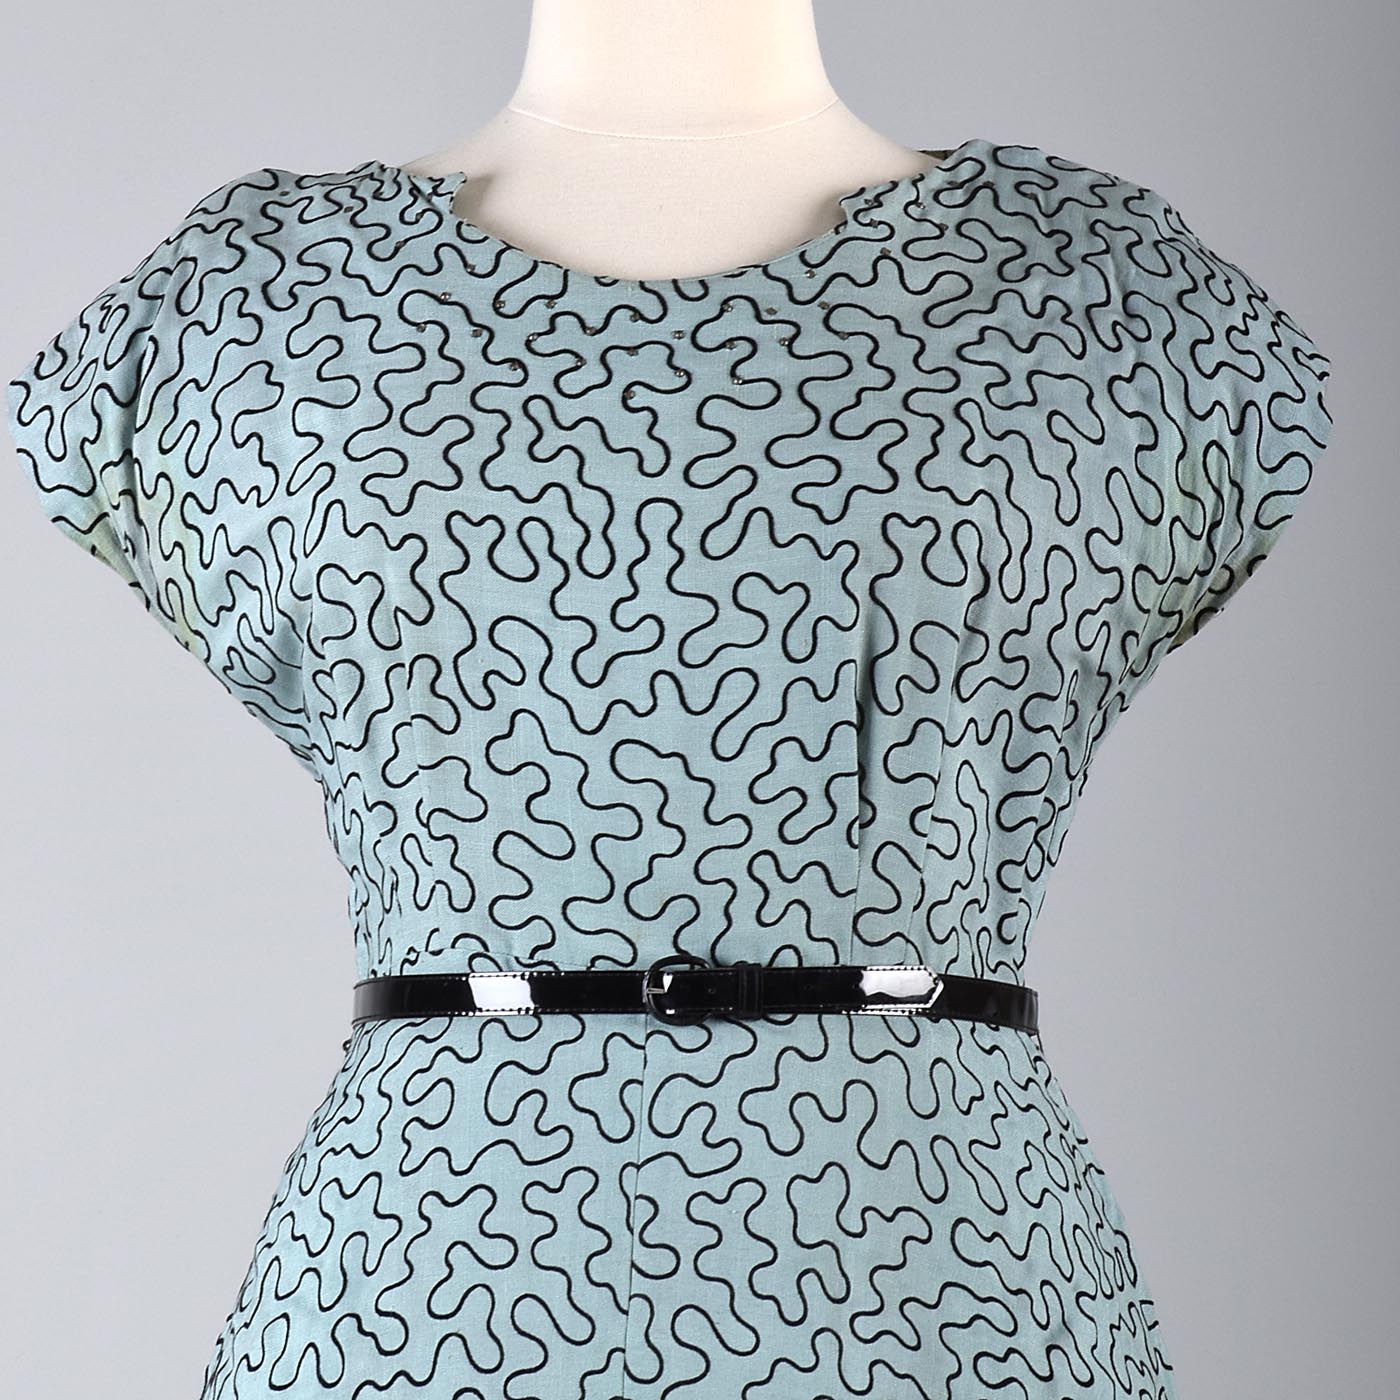 1950s Blue Dress with Amoeba Squiggles